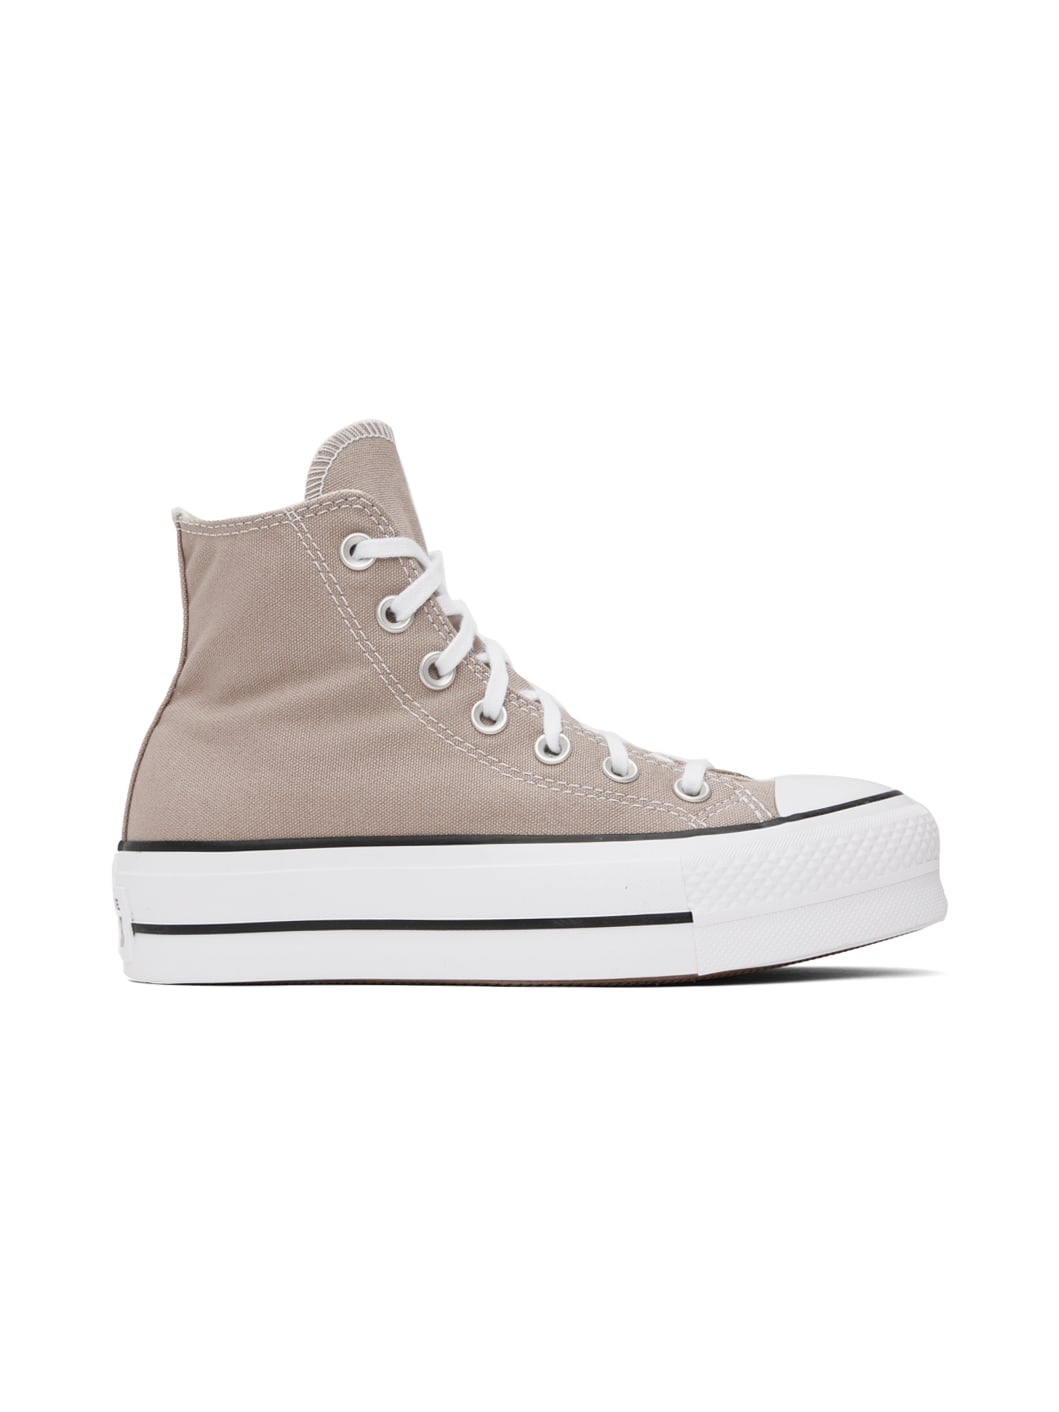 Taupe Chuck Taylor All Star Lift Platform High Top Sneakers - 1